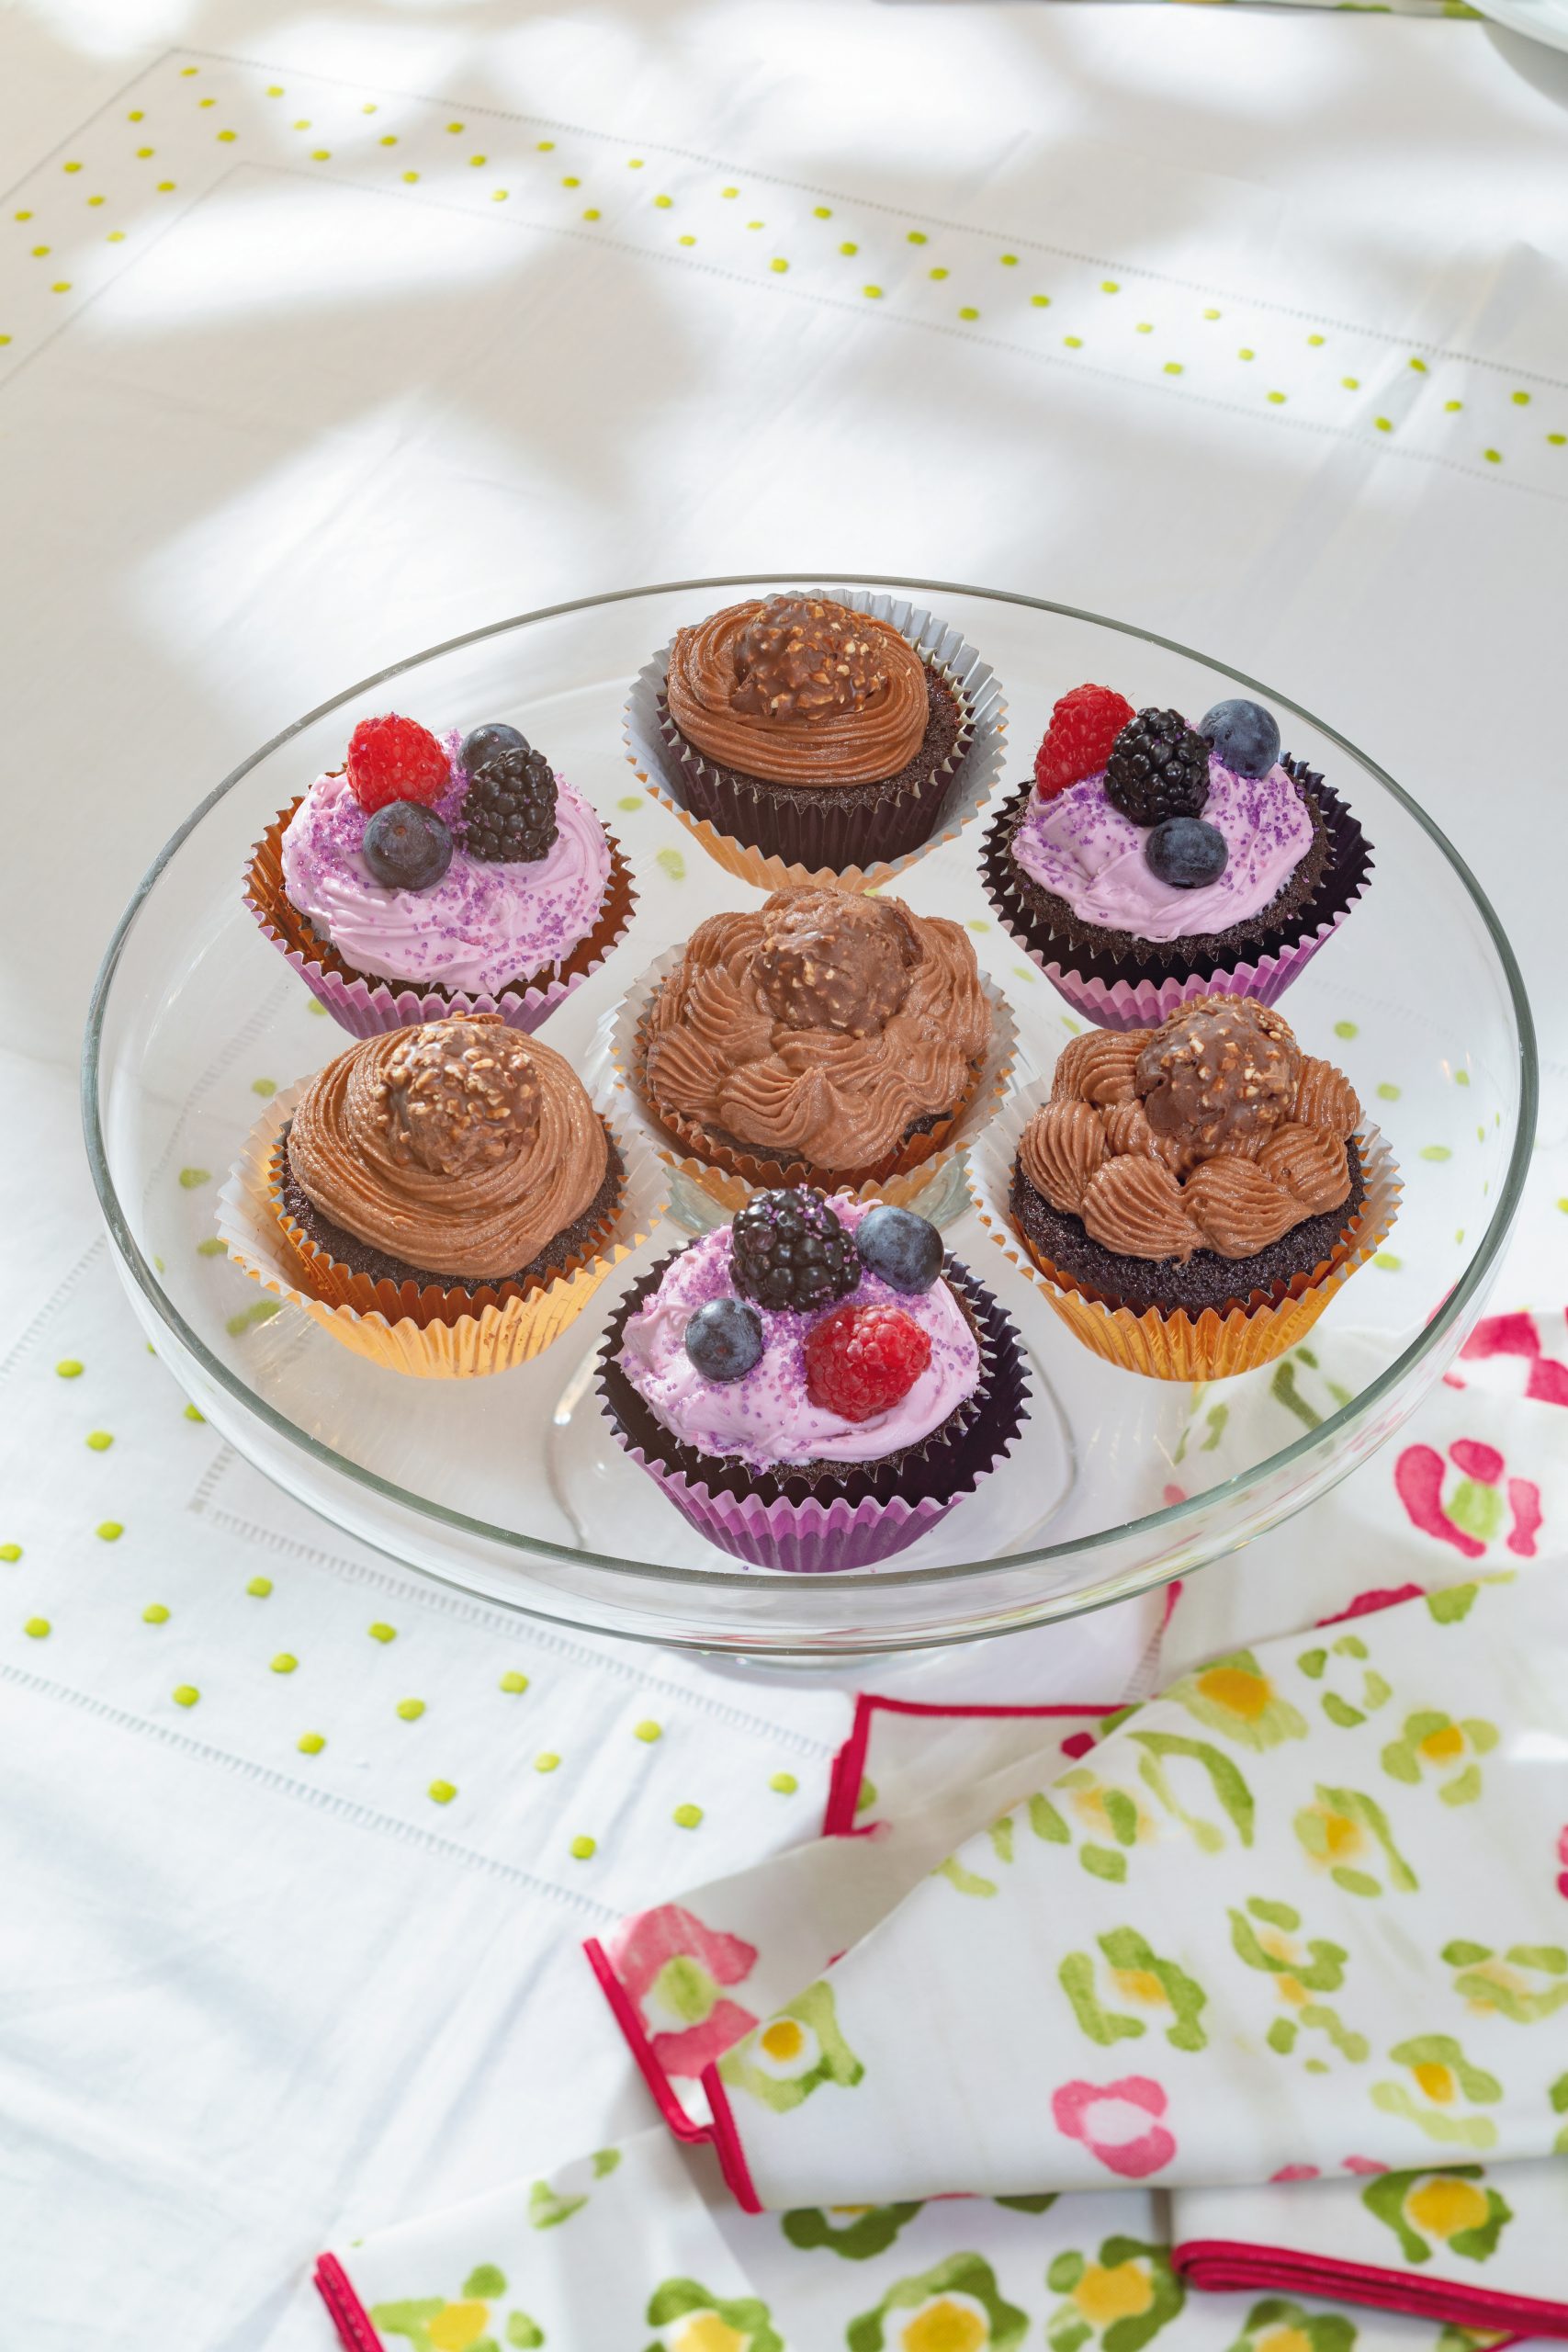 Chocolate Hazelnut Cupcakes can be topped with chocolate hazelnut frosting or cream cheese berry frosting. Courtesy of non(e)such: Karen Lee Ballard Hem Topper tablecloth in lime with floral Ballard napkins. 